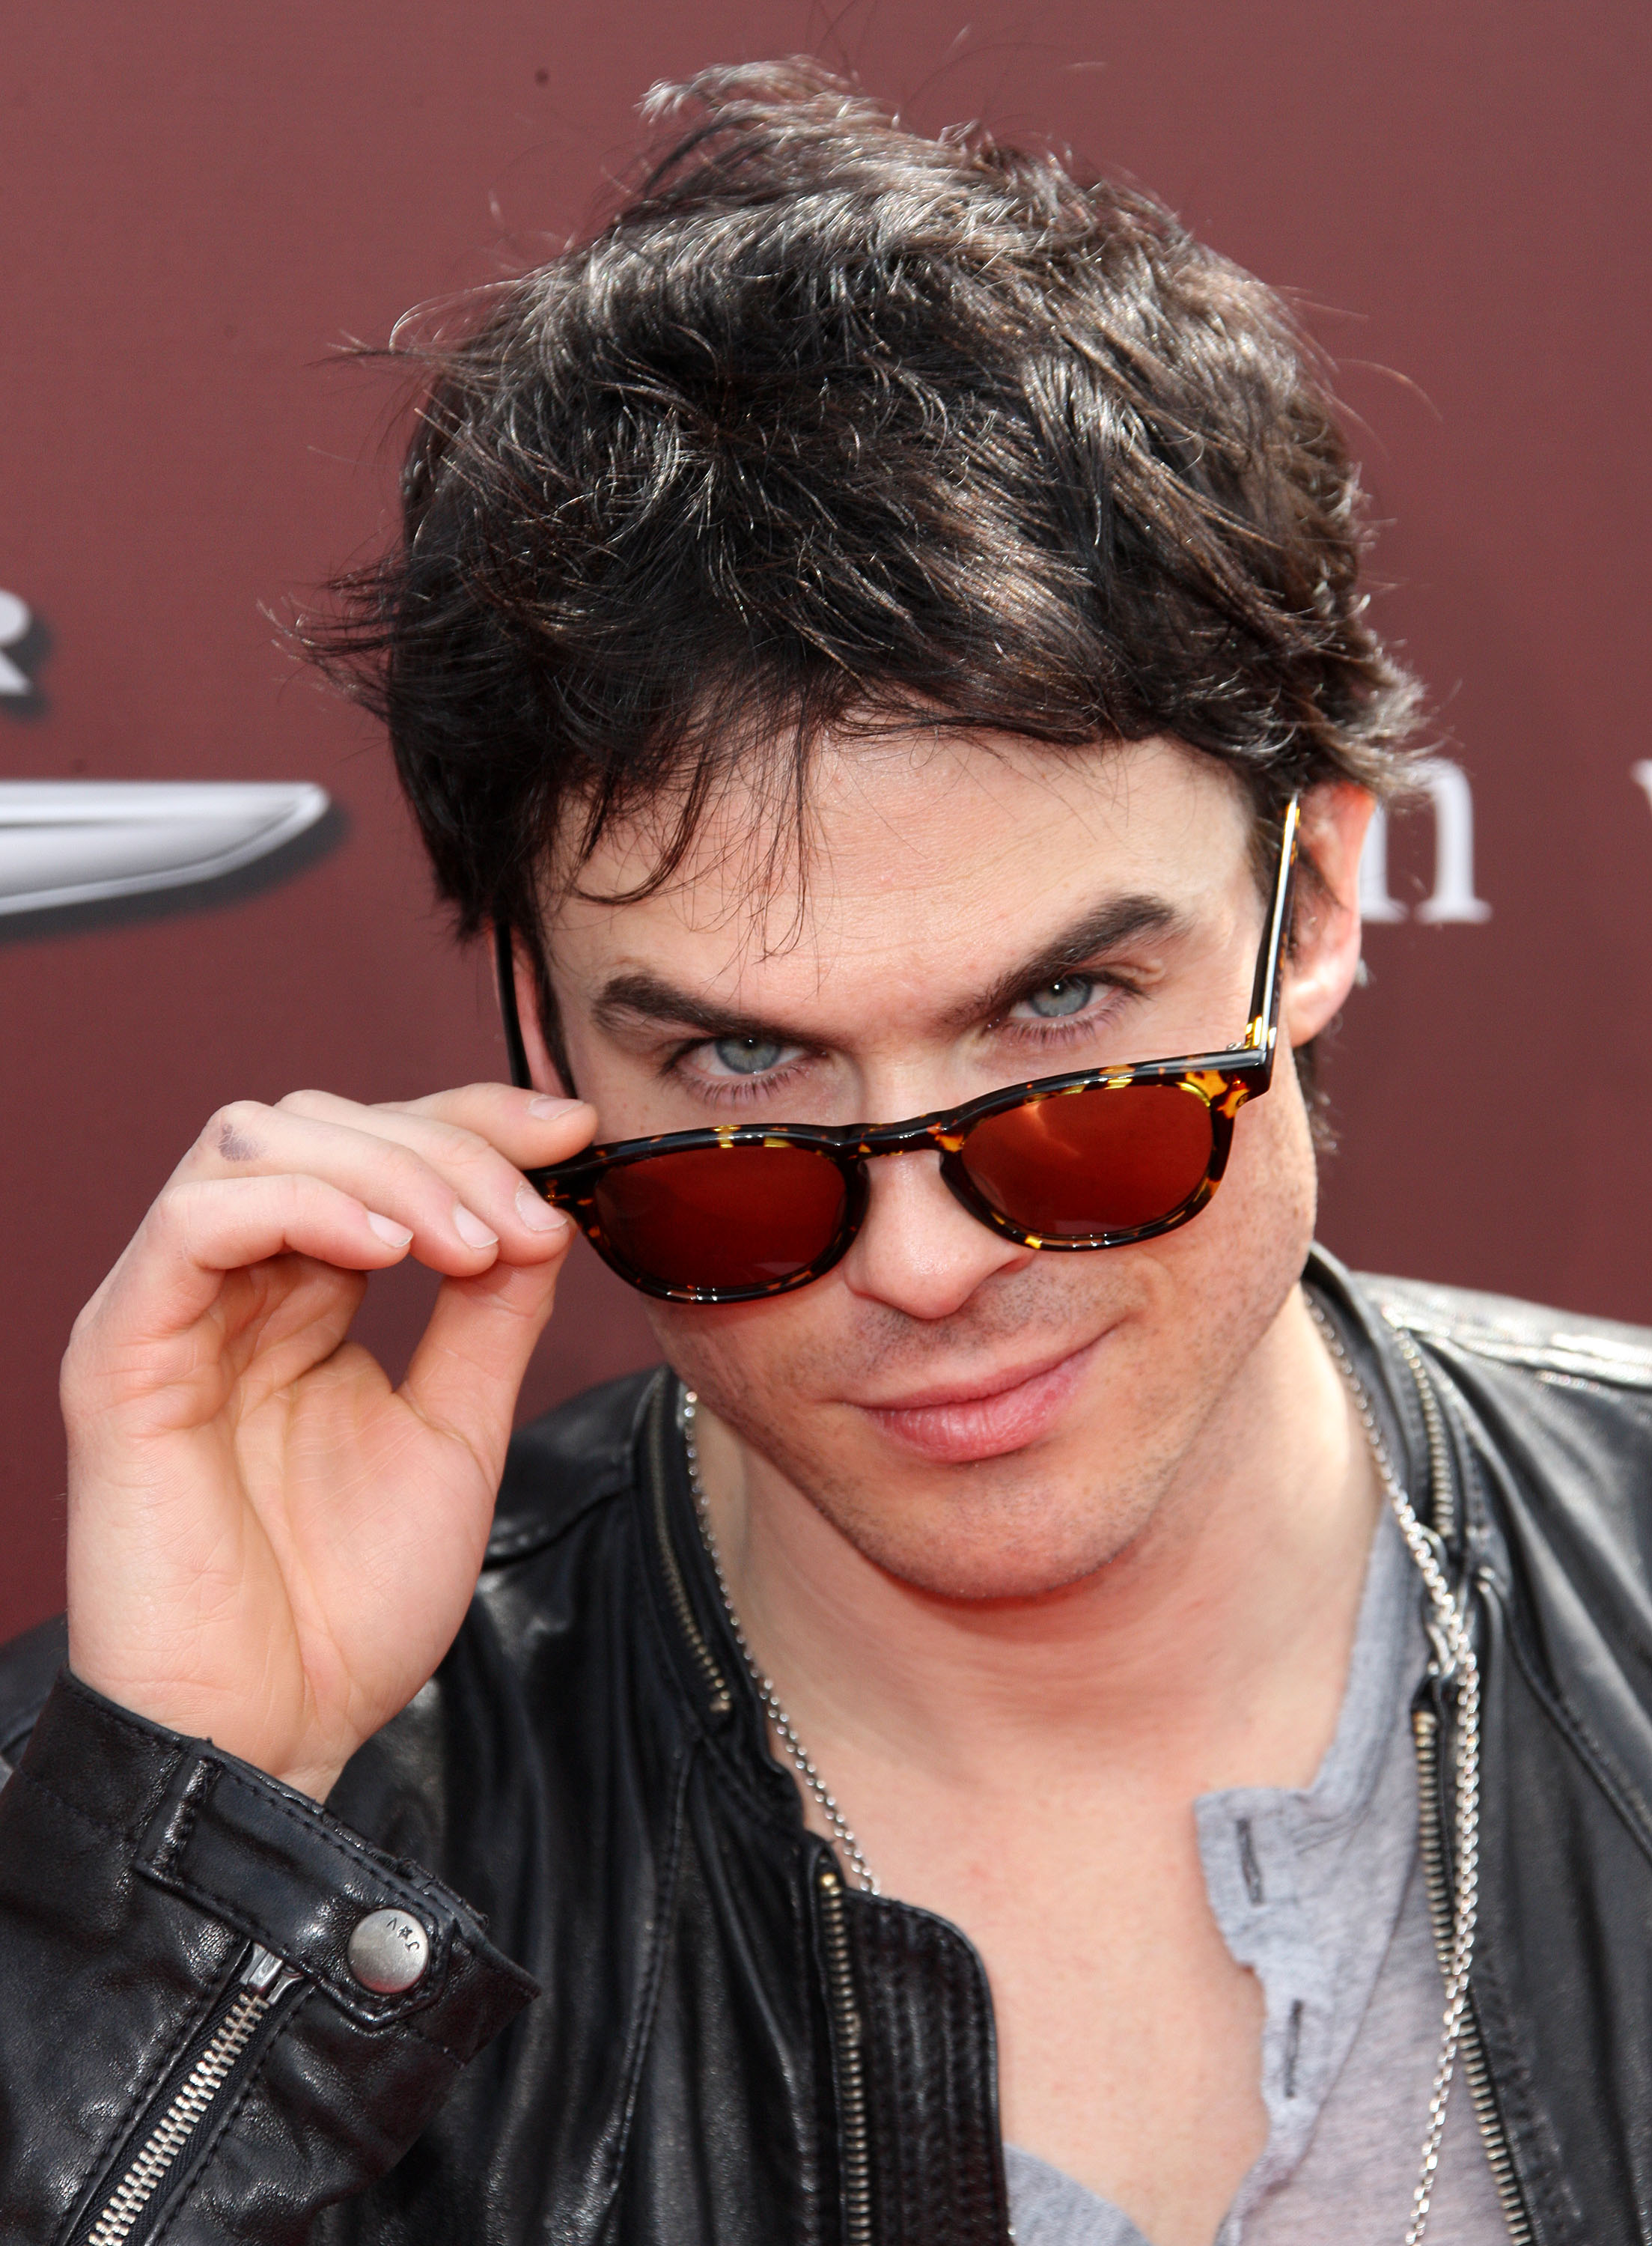 WEST HOLLYWOOD, CA - MARCH 11: Actor Ian Somerhalder attends the 9th Annual John Varvatos Stuart House Benefit on March 11, 2012 in West Hollywood, California. (Photo by Frederick M. Brown/Getty Images)